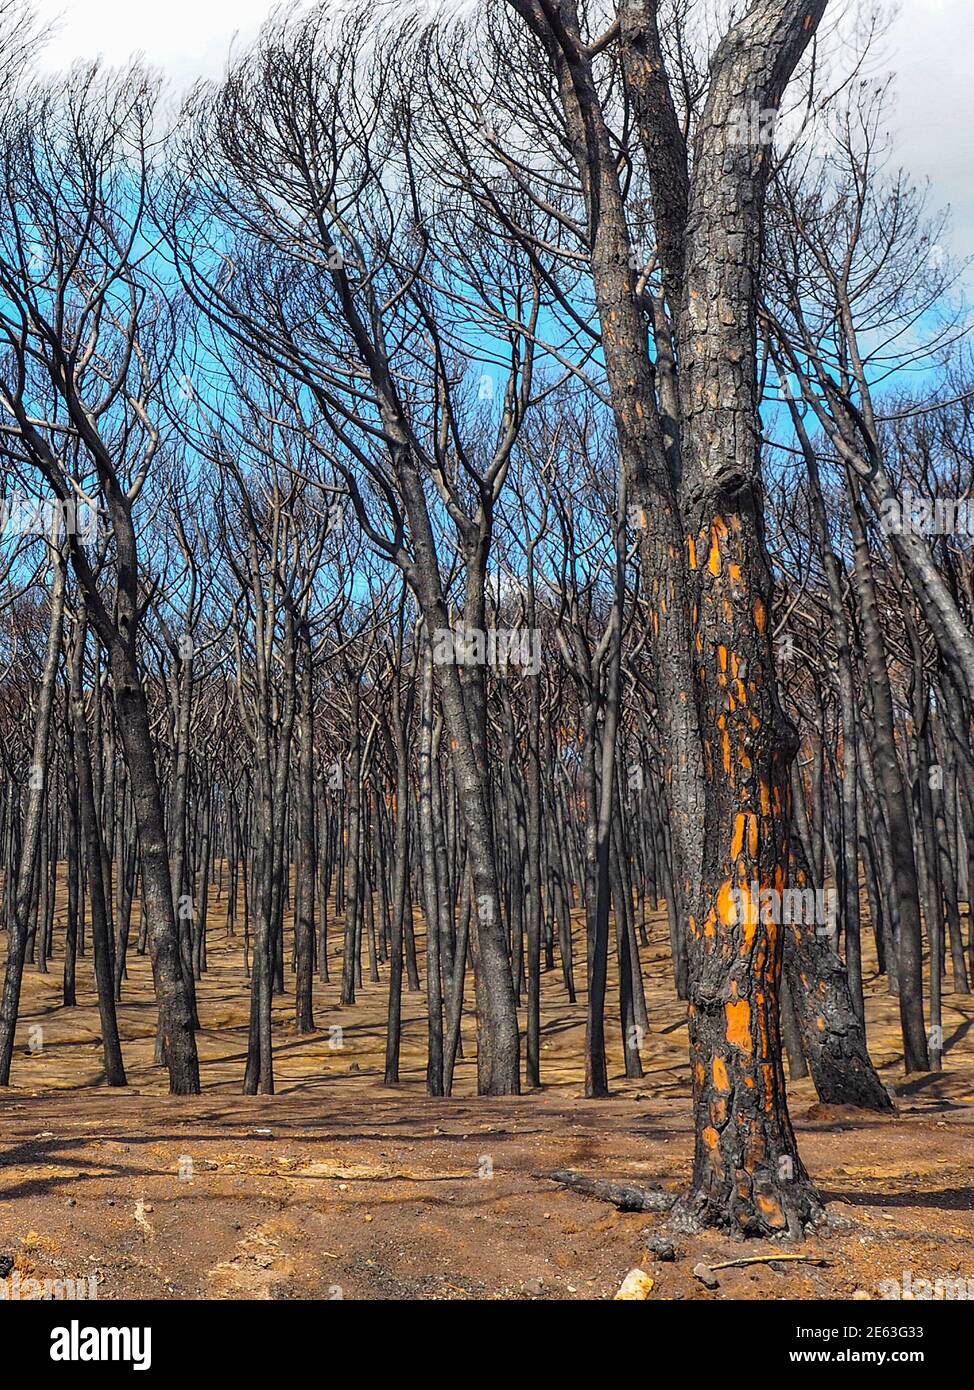 Trees damaged by fire on July 2017 in Vesuvius National Park, Italy, Campania, September 2017. Stock Photo